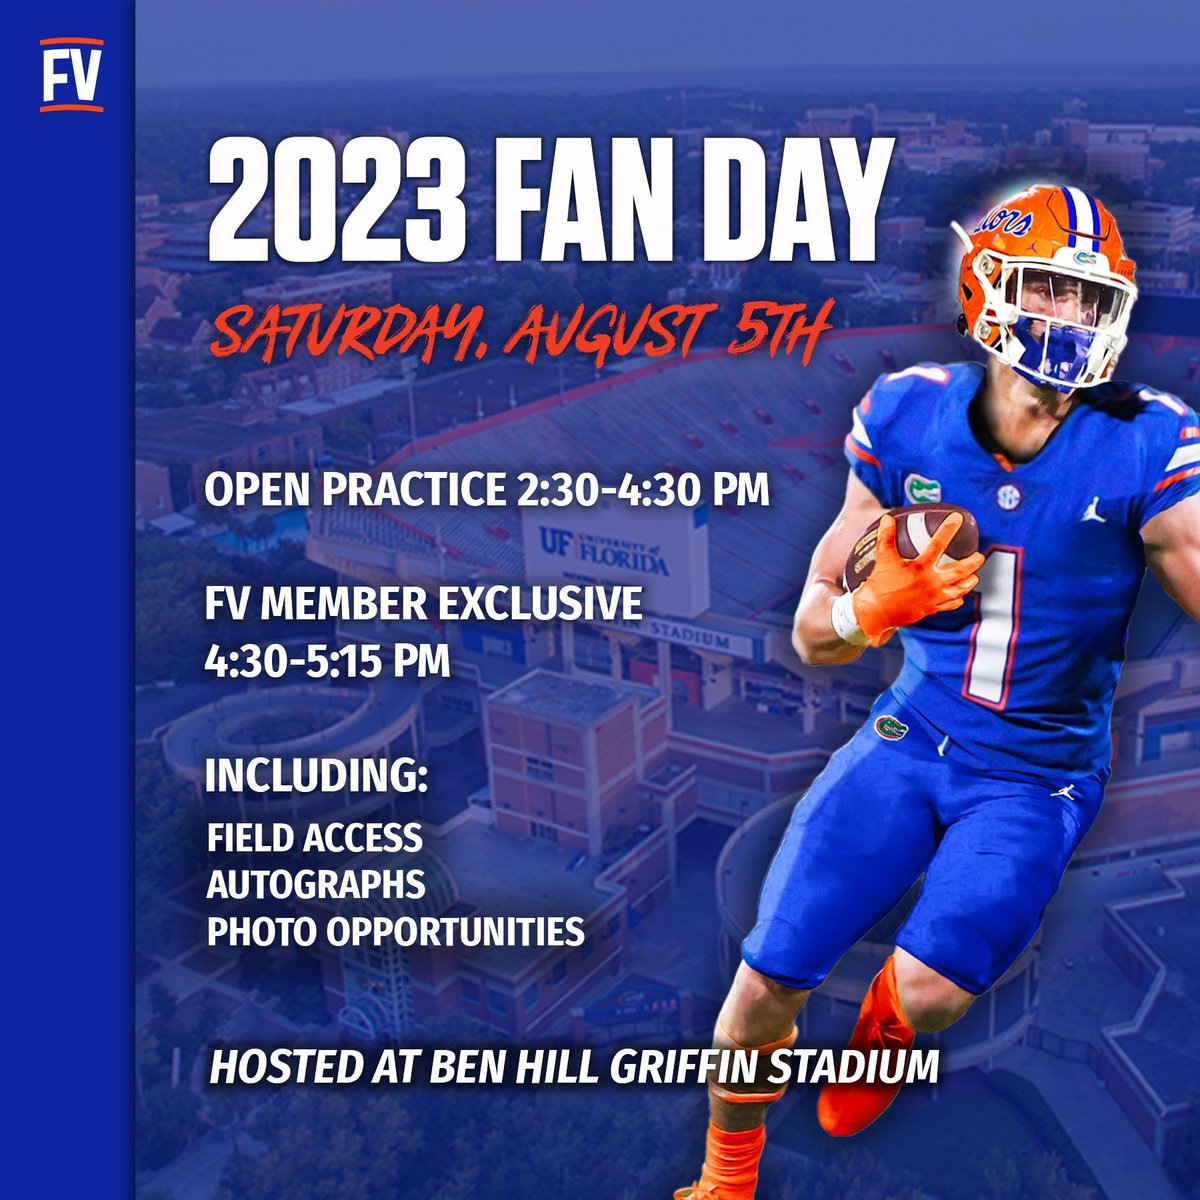 🏈Join us on August 5th, for an unforgettable day of @GatorsFB at an Open Practice session & exclusive for FV members, access to the field after for autographs and photo opportunities. For more information, RSVP, and updates, check out your member dashboard! #FanFest2023